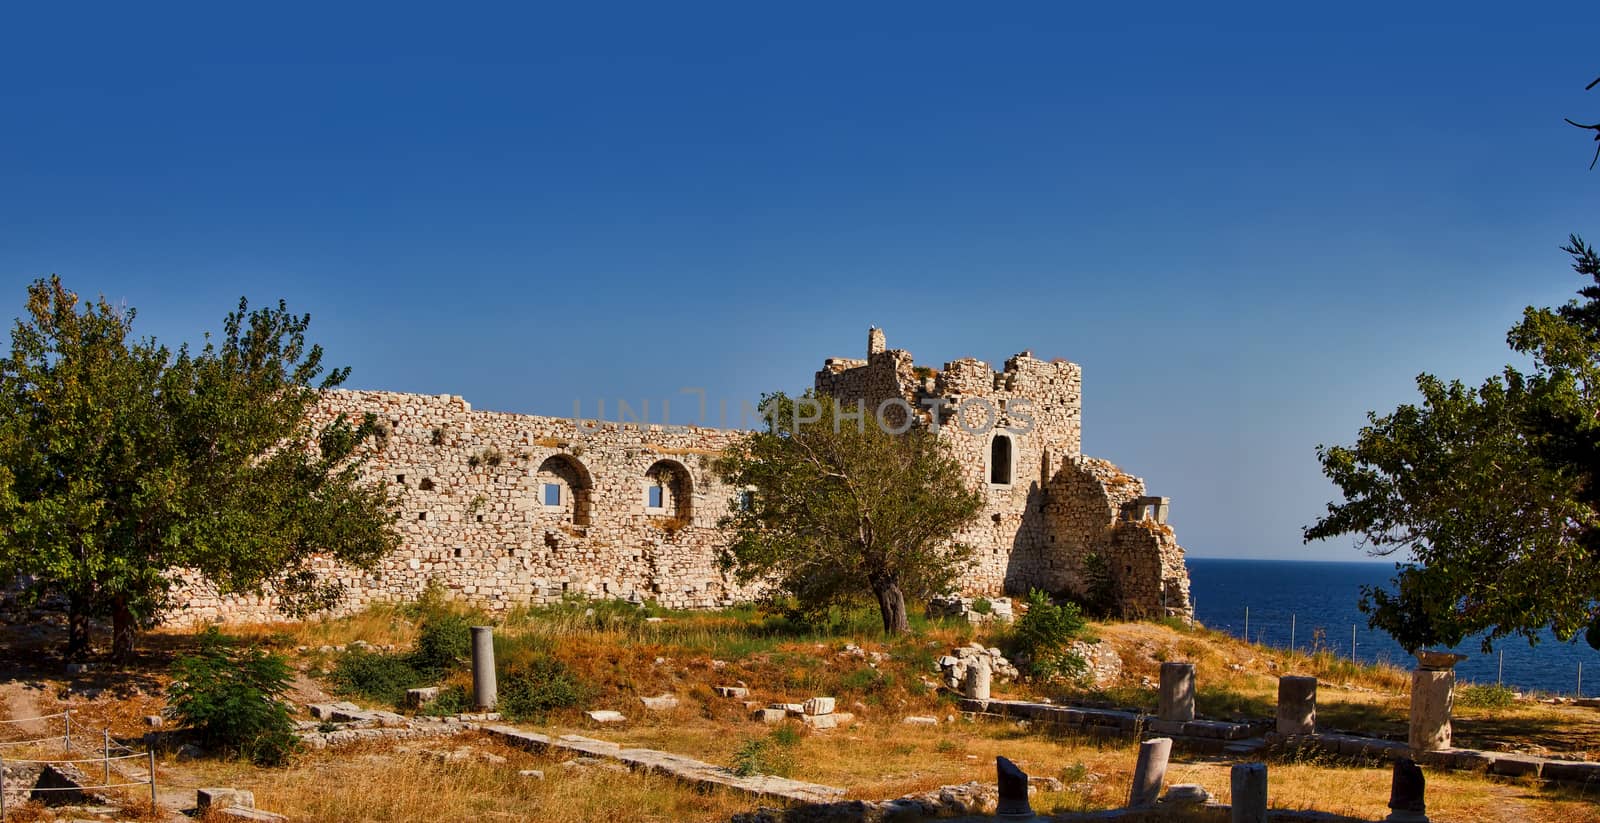 The castle of Lykourgos Logothetis is situated to the southwest of the port of Pithagorio